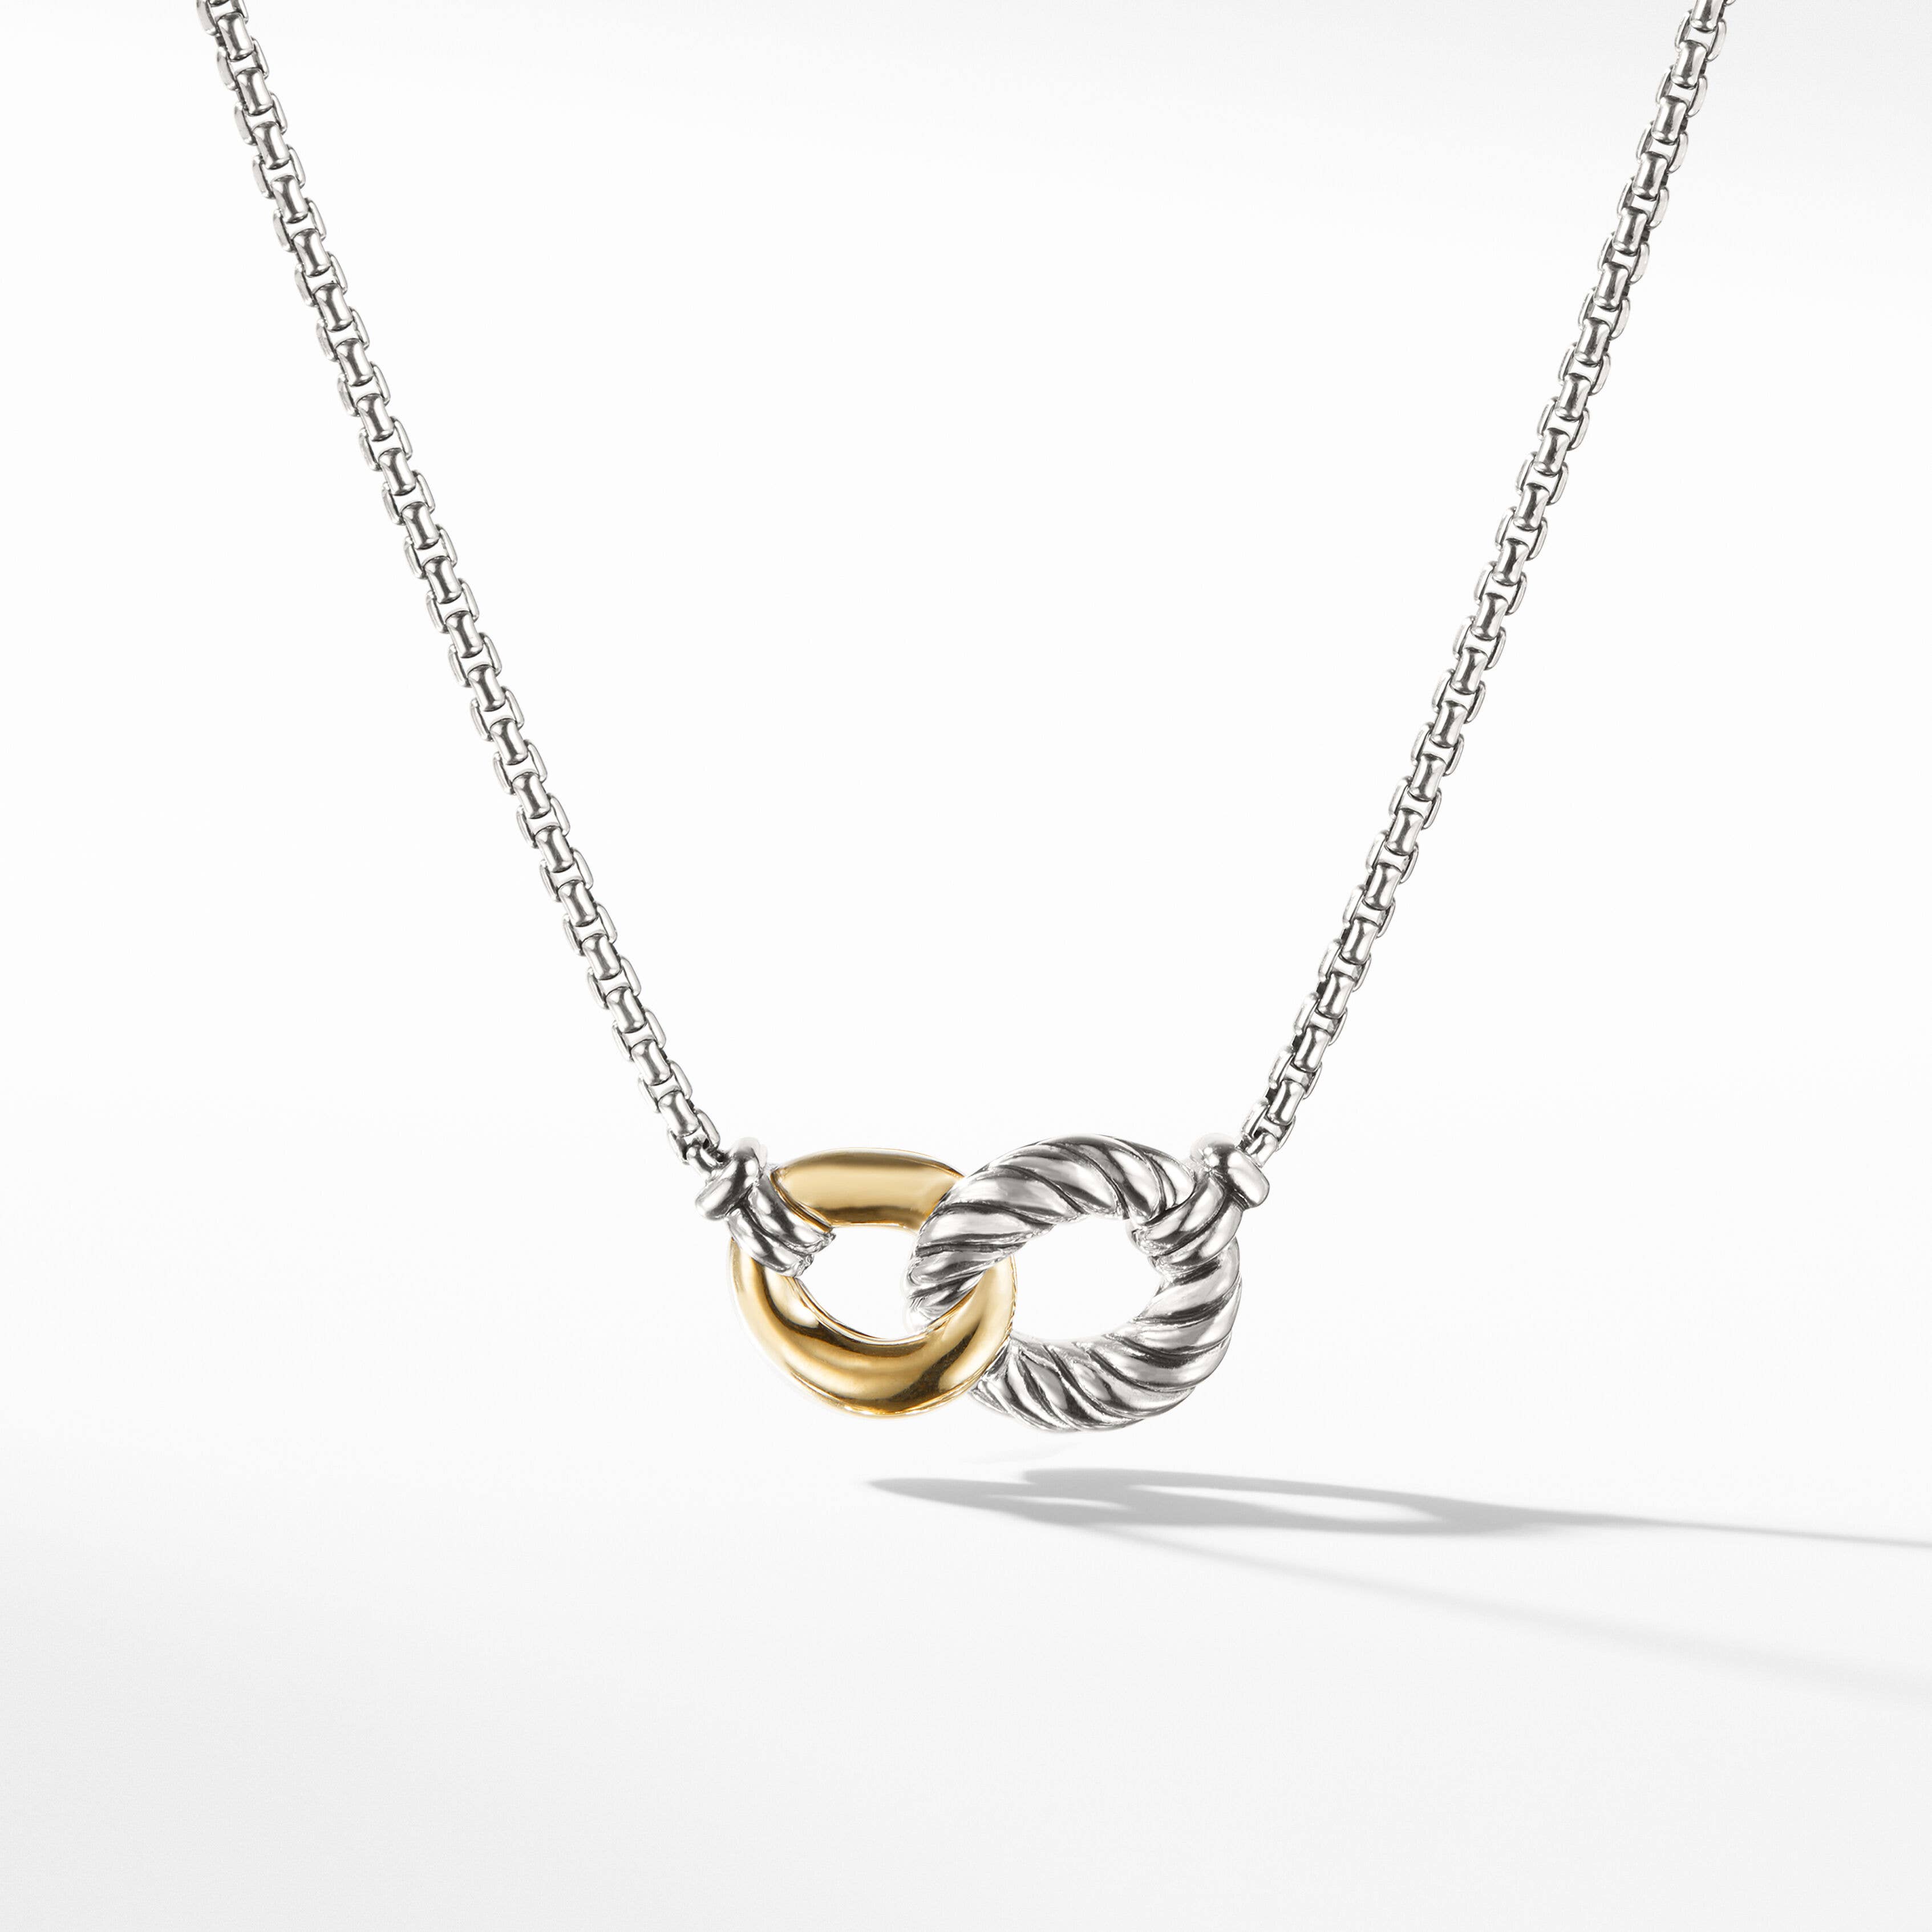 Belmont® Curb Link Necklace in Sterling Silver with 18K Yellow Gold